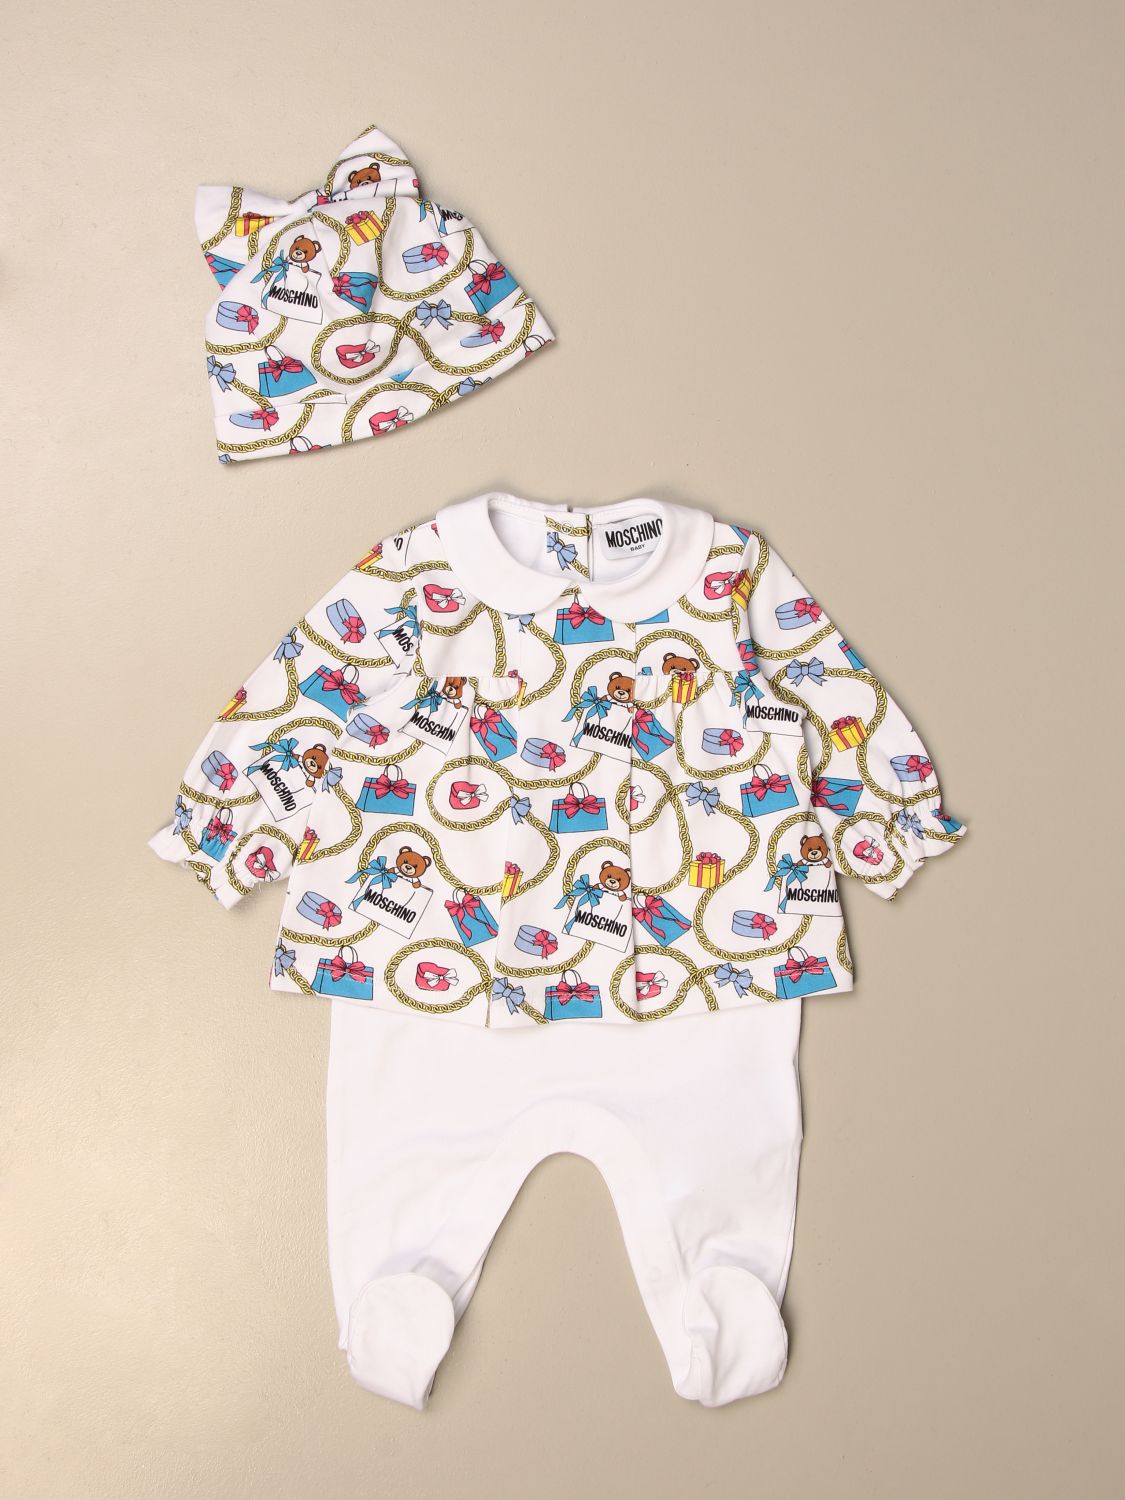 moschino infant clothes